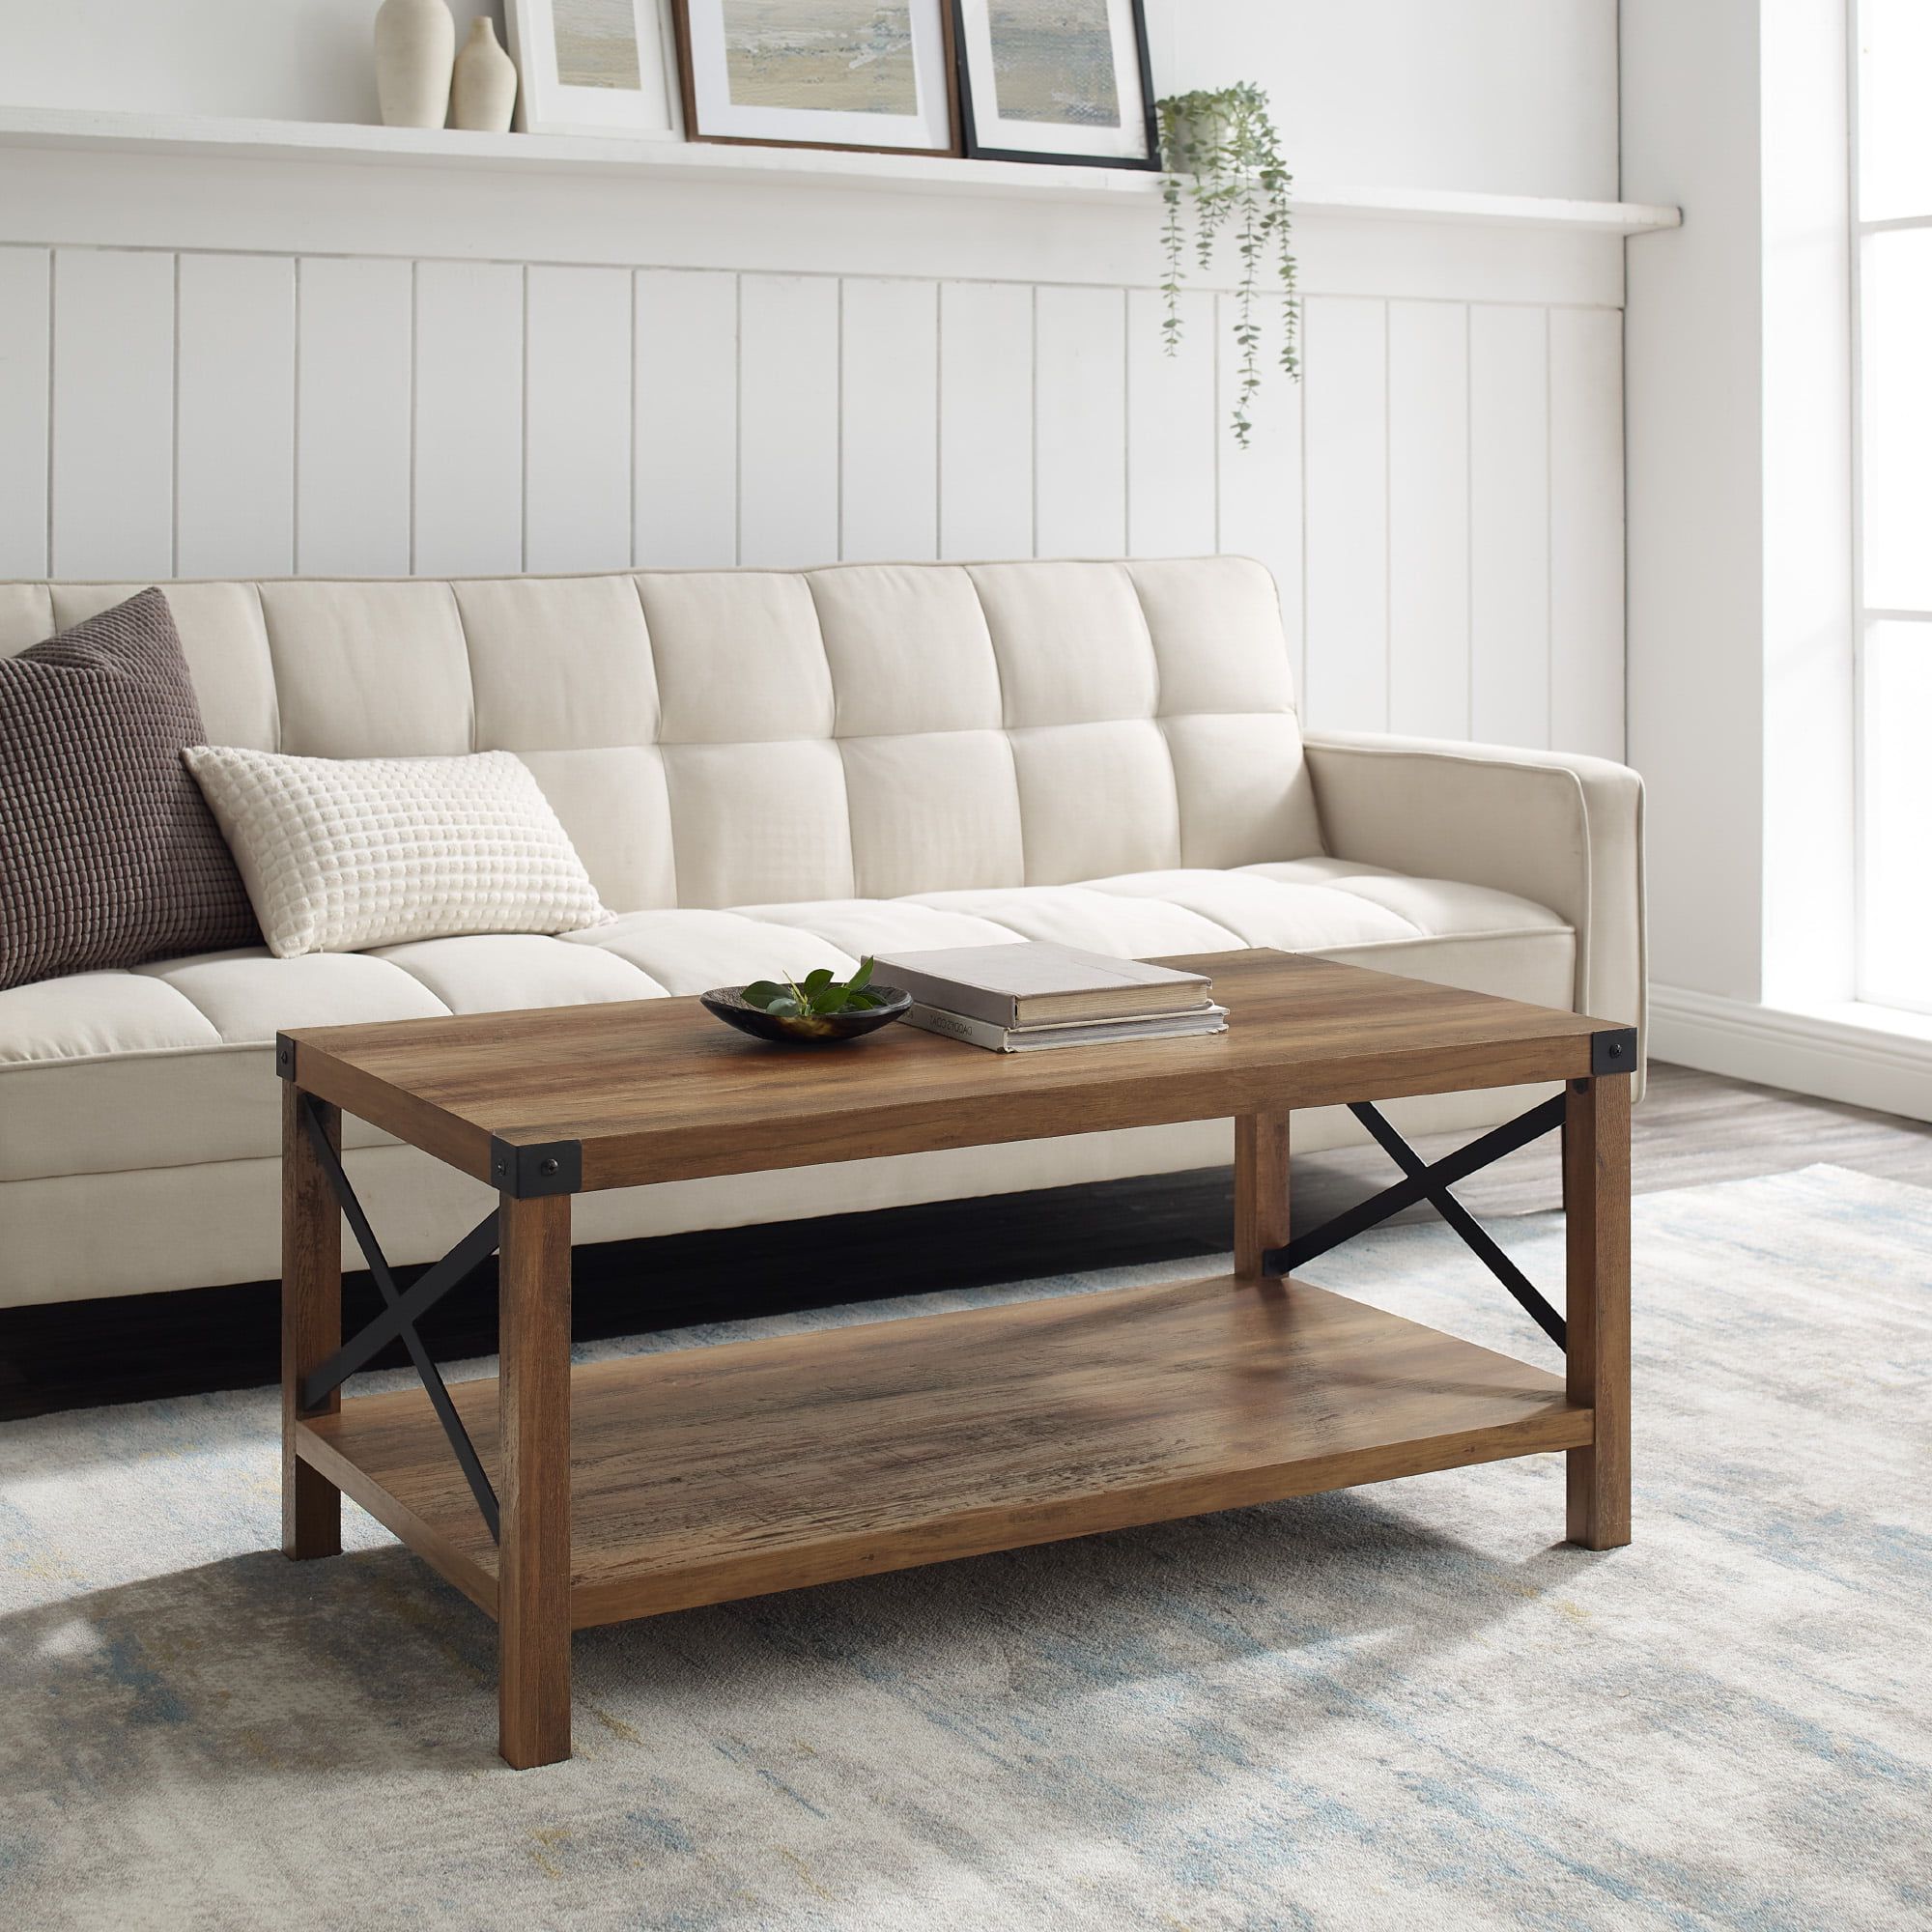 Woven Paths Magnolia Metal X Coffee Table, Reclaimed Barnwood – Walmart Intended For Woven Paths Coffee Tables (View 16 of 20)